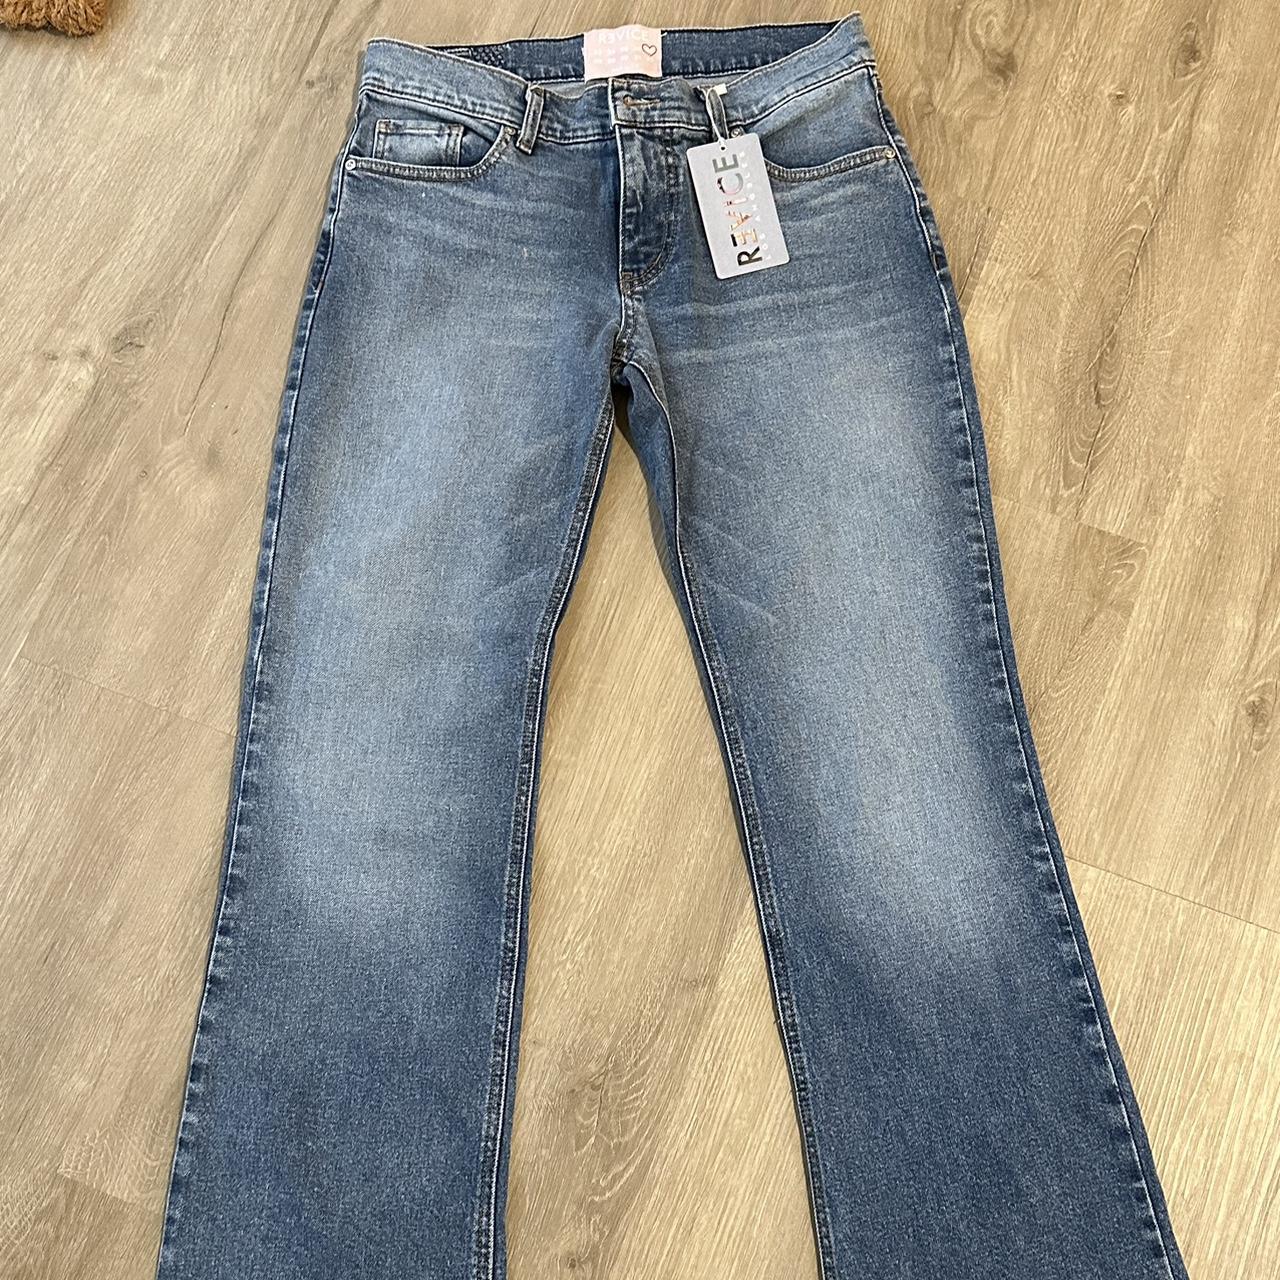 REVICE DENIM LOW RISE NEW WITH TAGS SIZE 27 (XS, S) - Depop